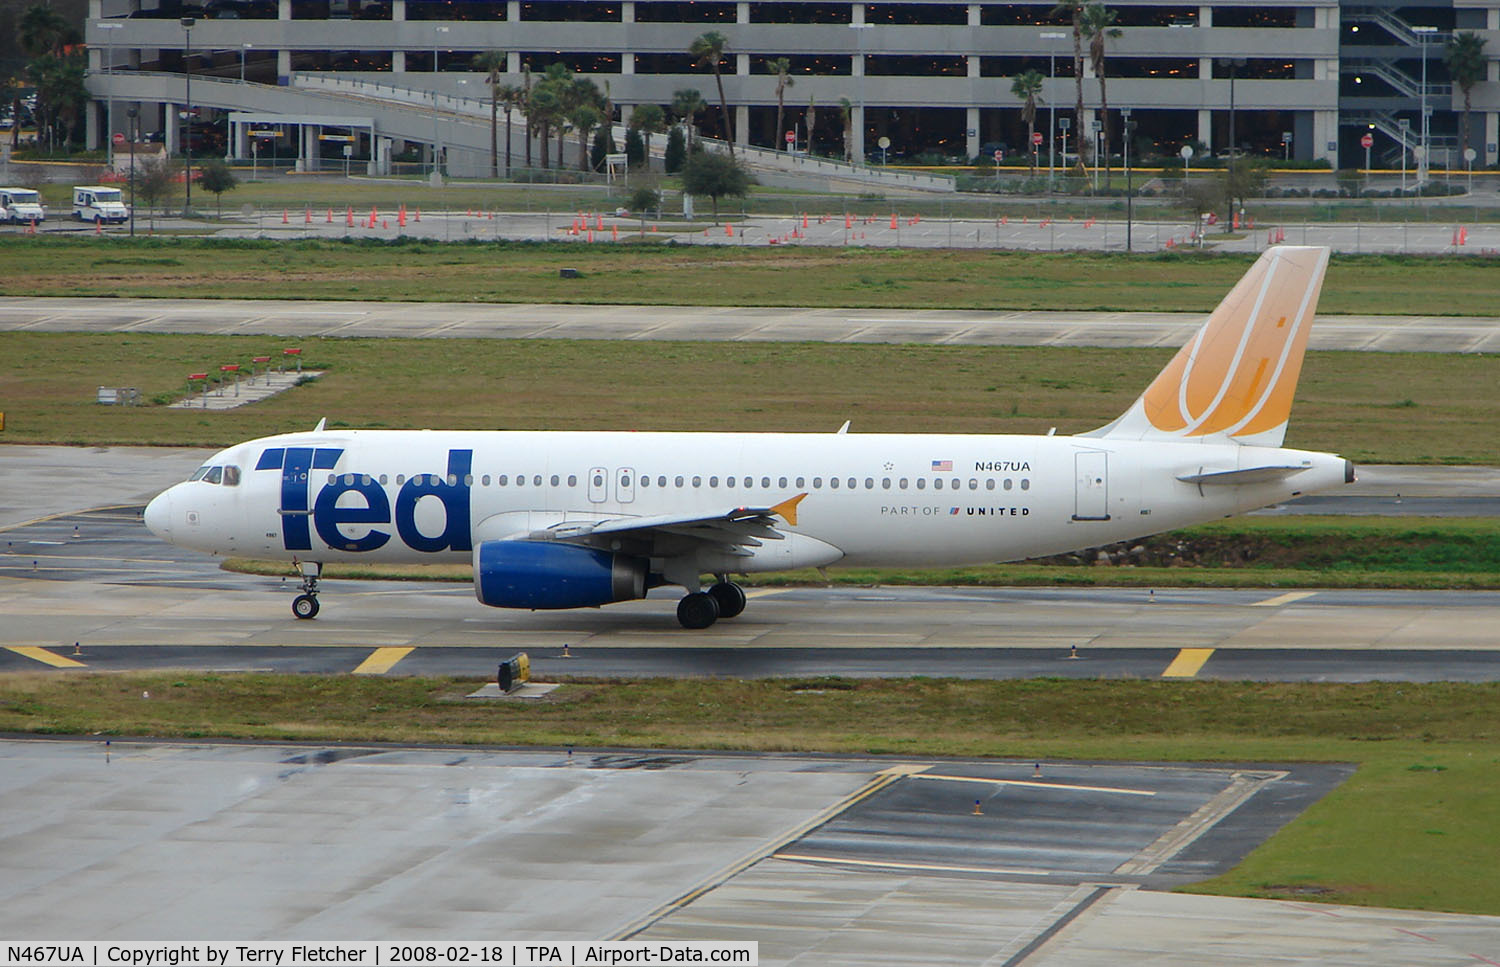 N467UA, 2000 Airbus A320-232 C/N 1359, TED A320 taxies in at Tampa